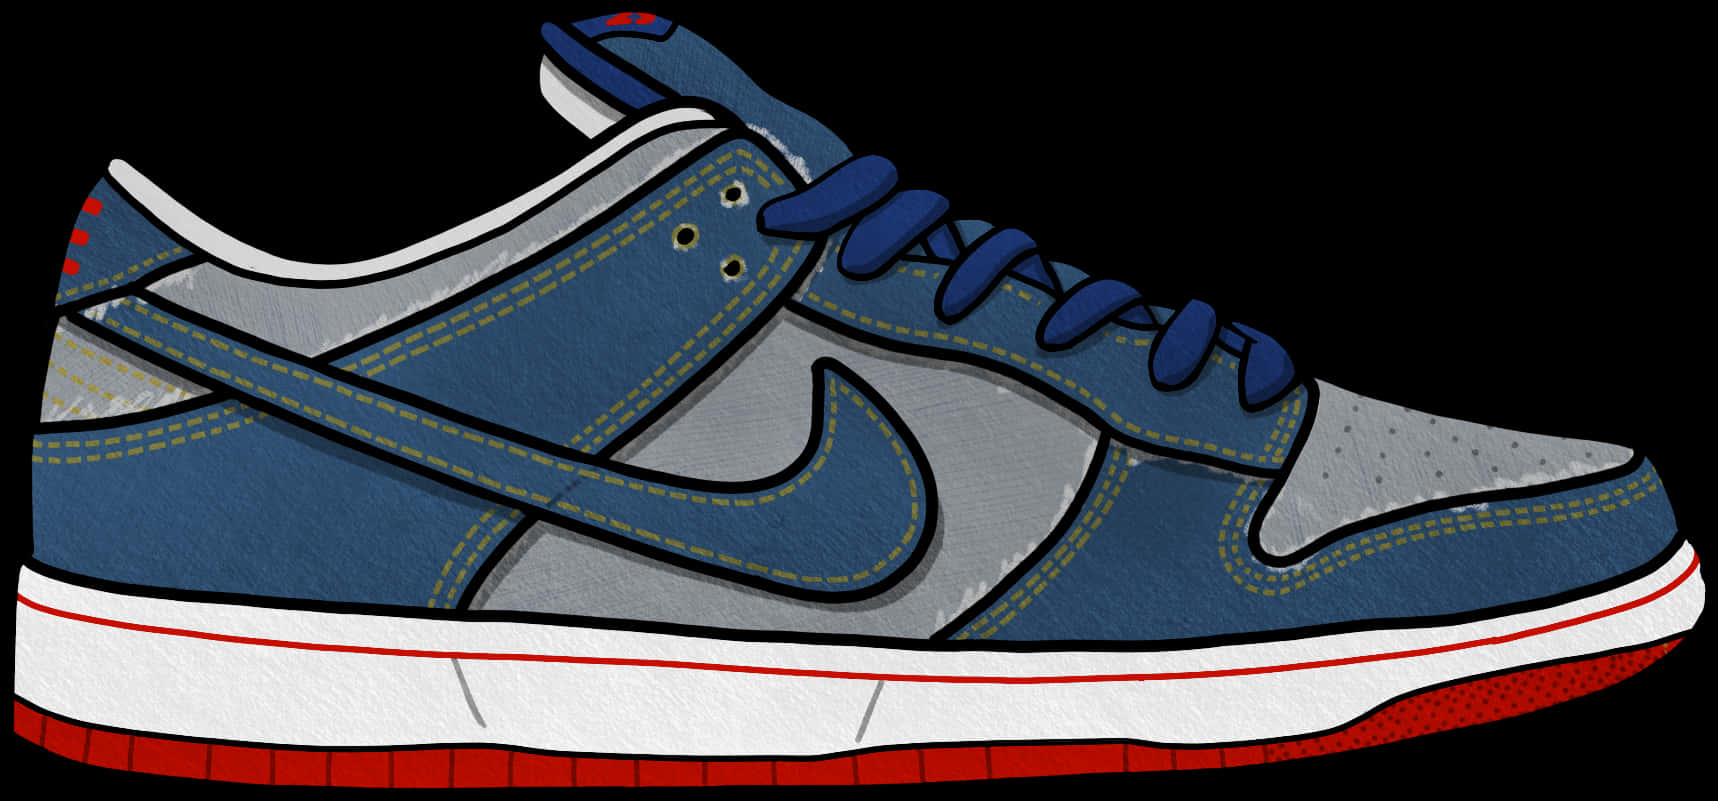 A Blue And Grey Shoe